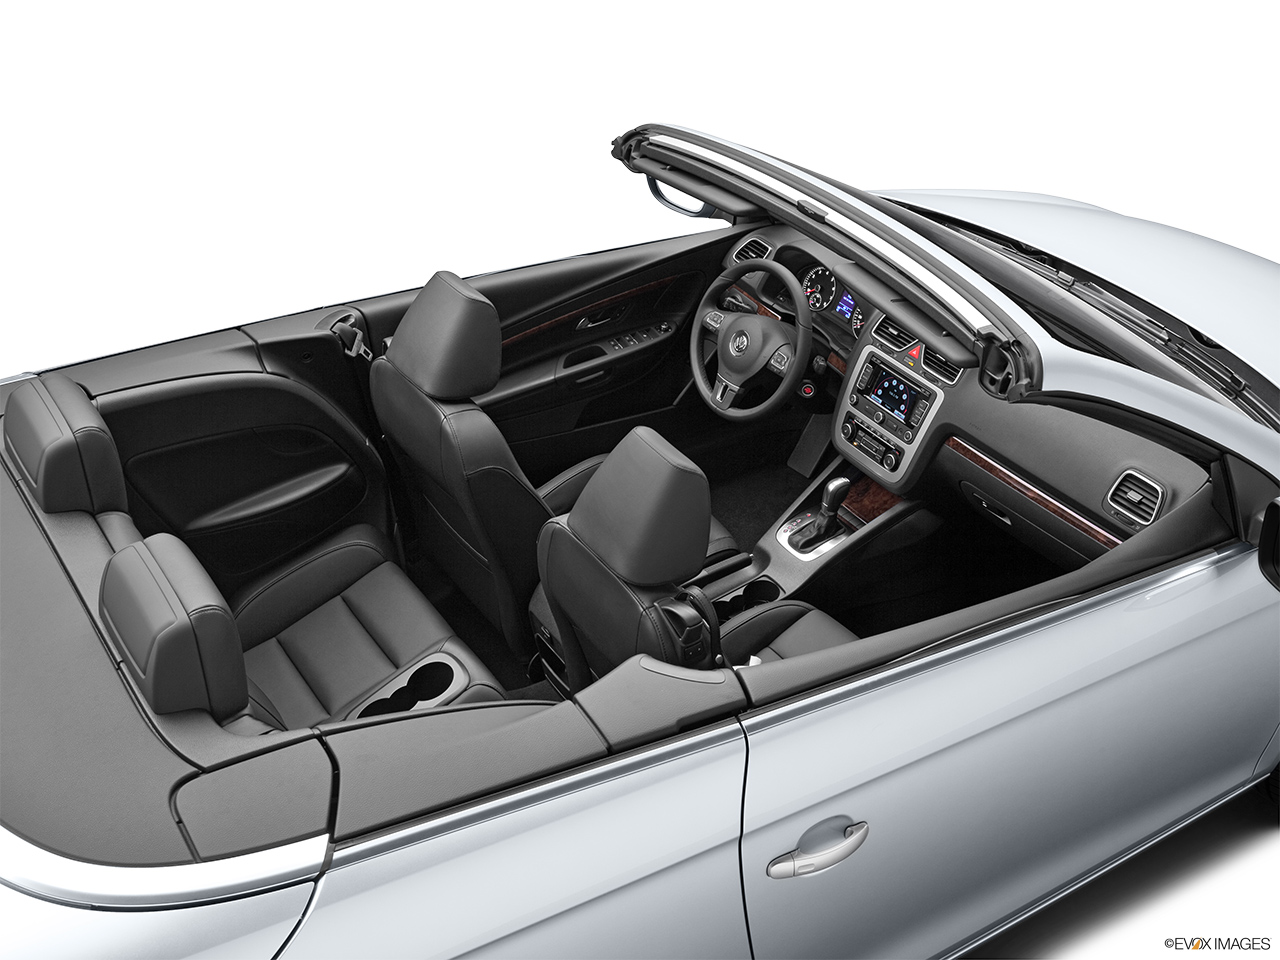 2012 Volkswagen Eos Lux Convertible Hero (high from passenger, looking down into interior). 